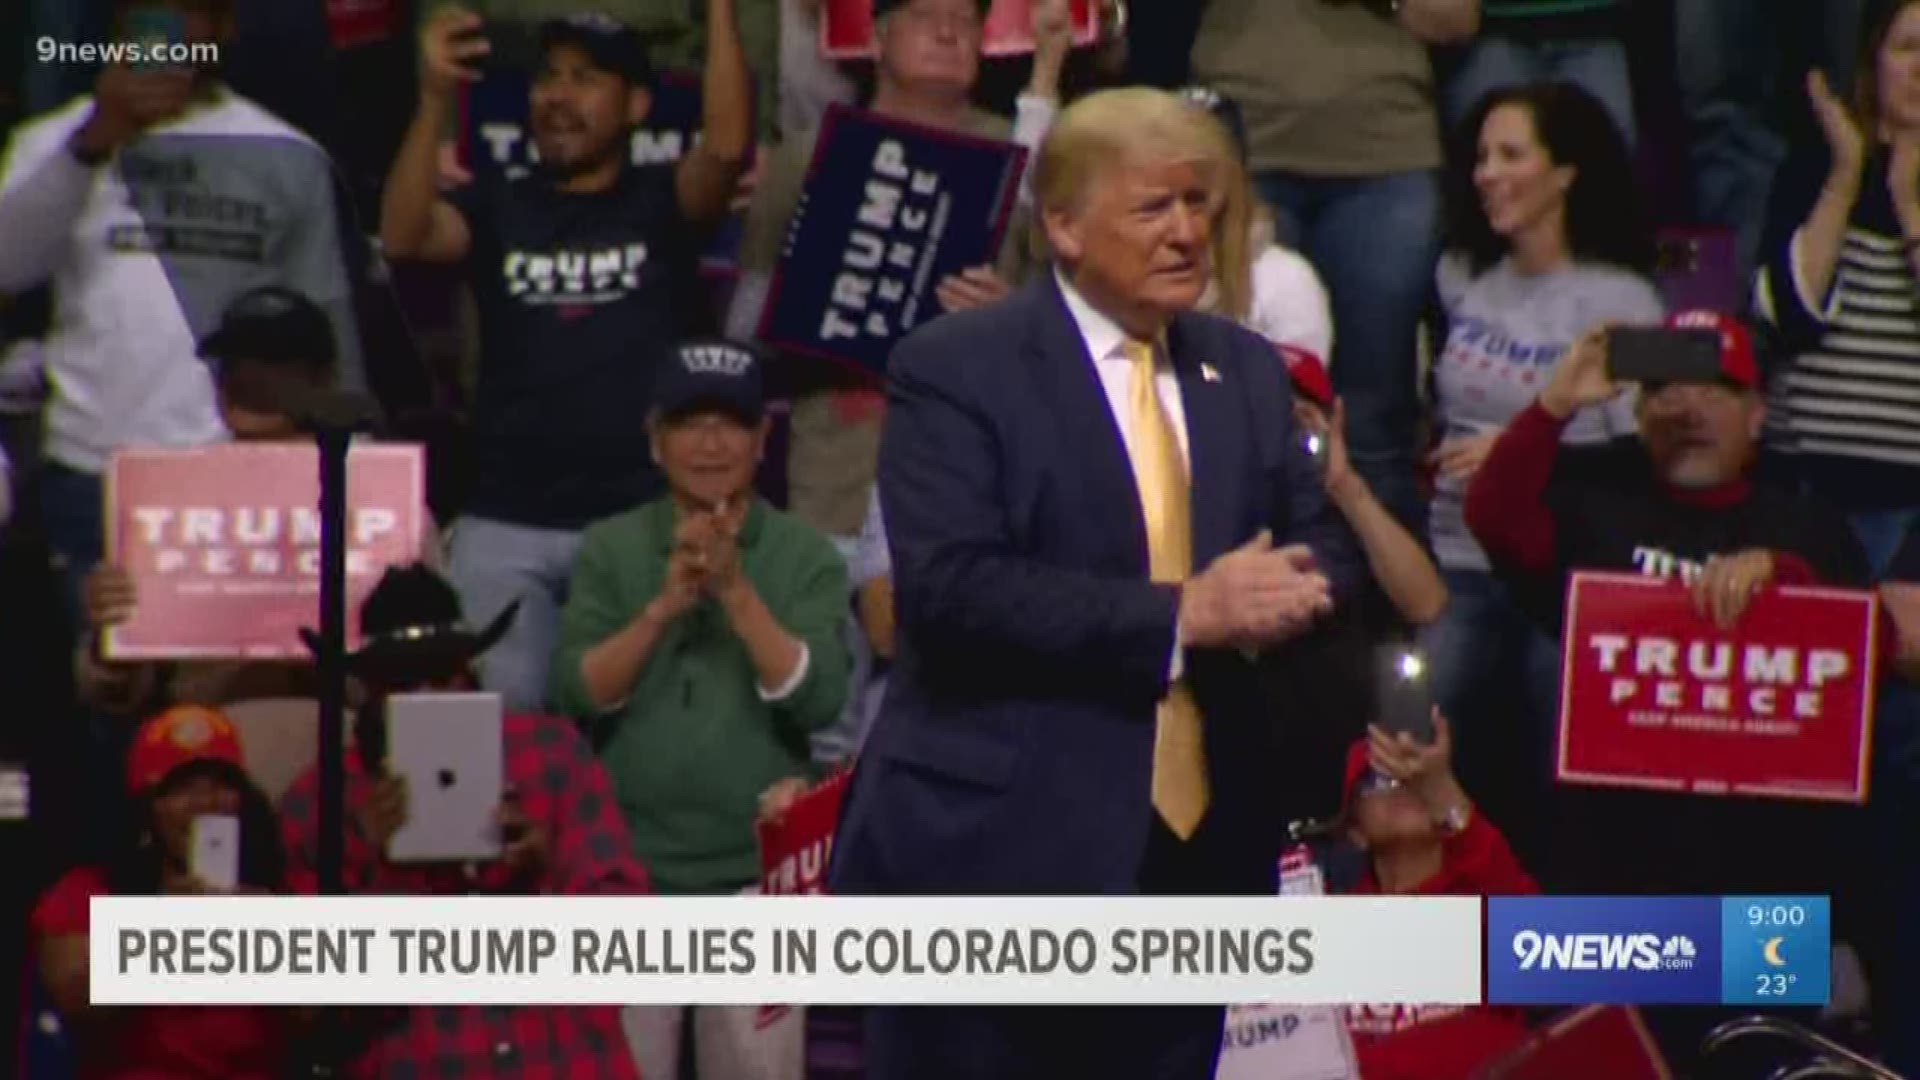 The president spoke in front of a packed crowd in Colorado Springs for more than 90 minutes.